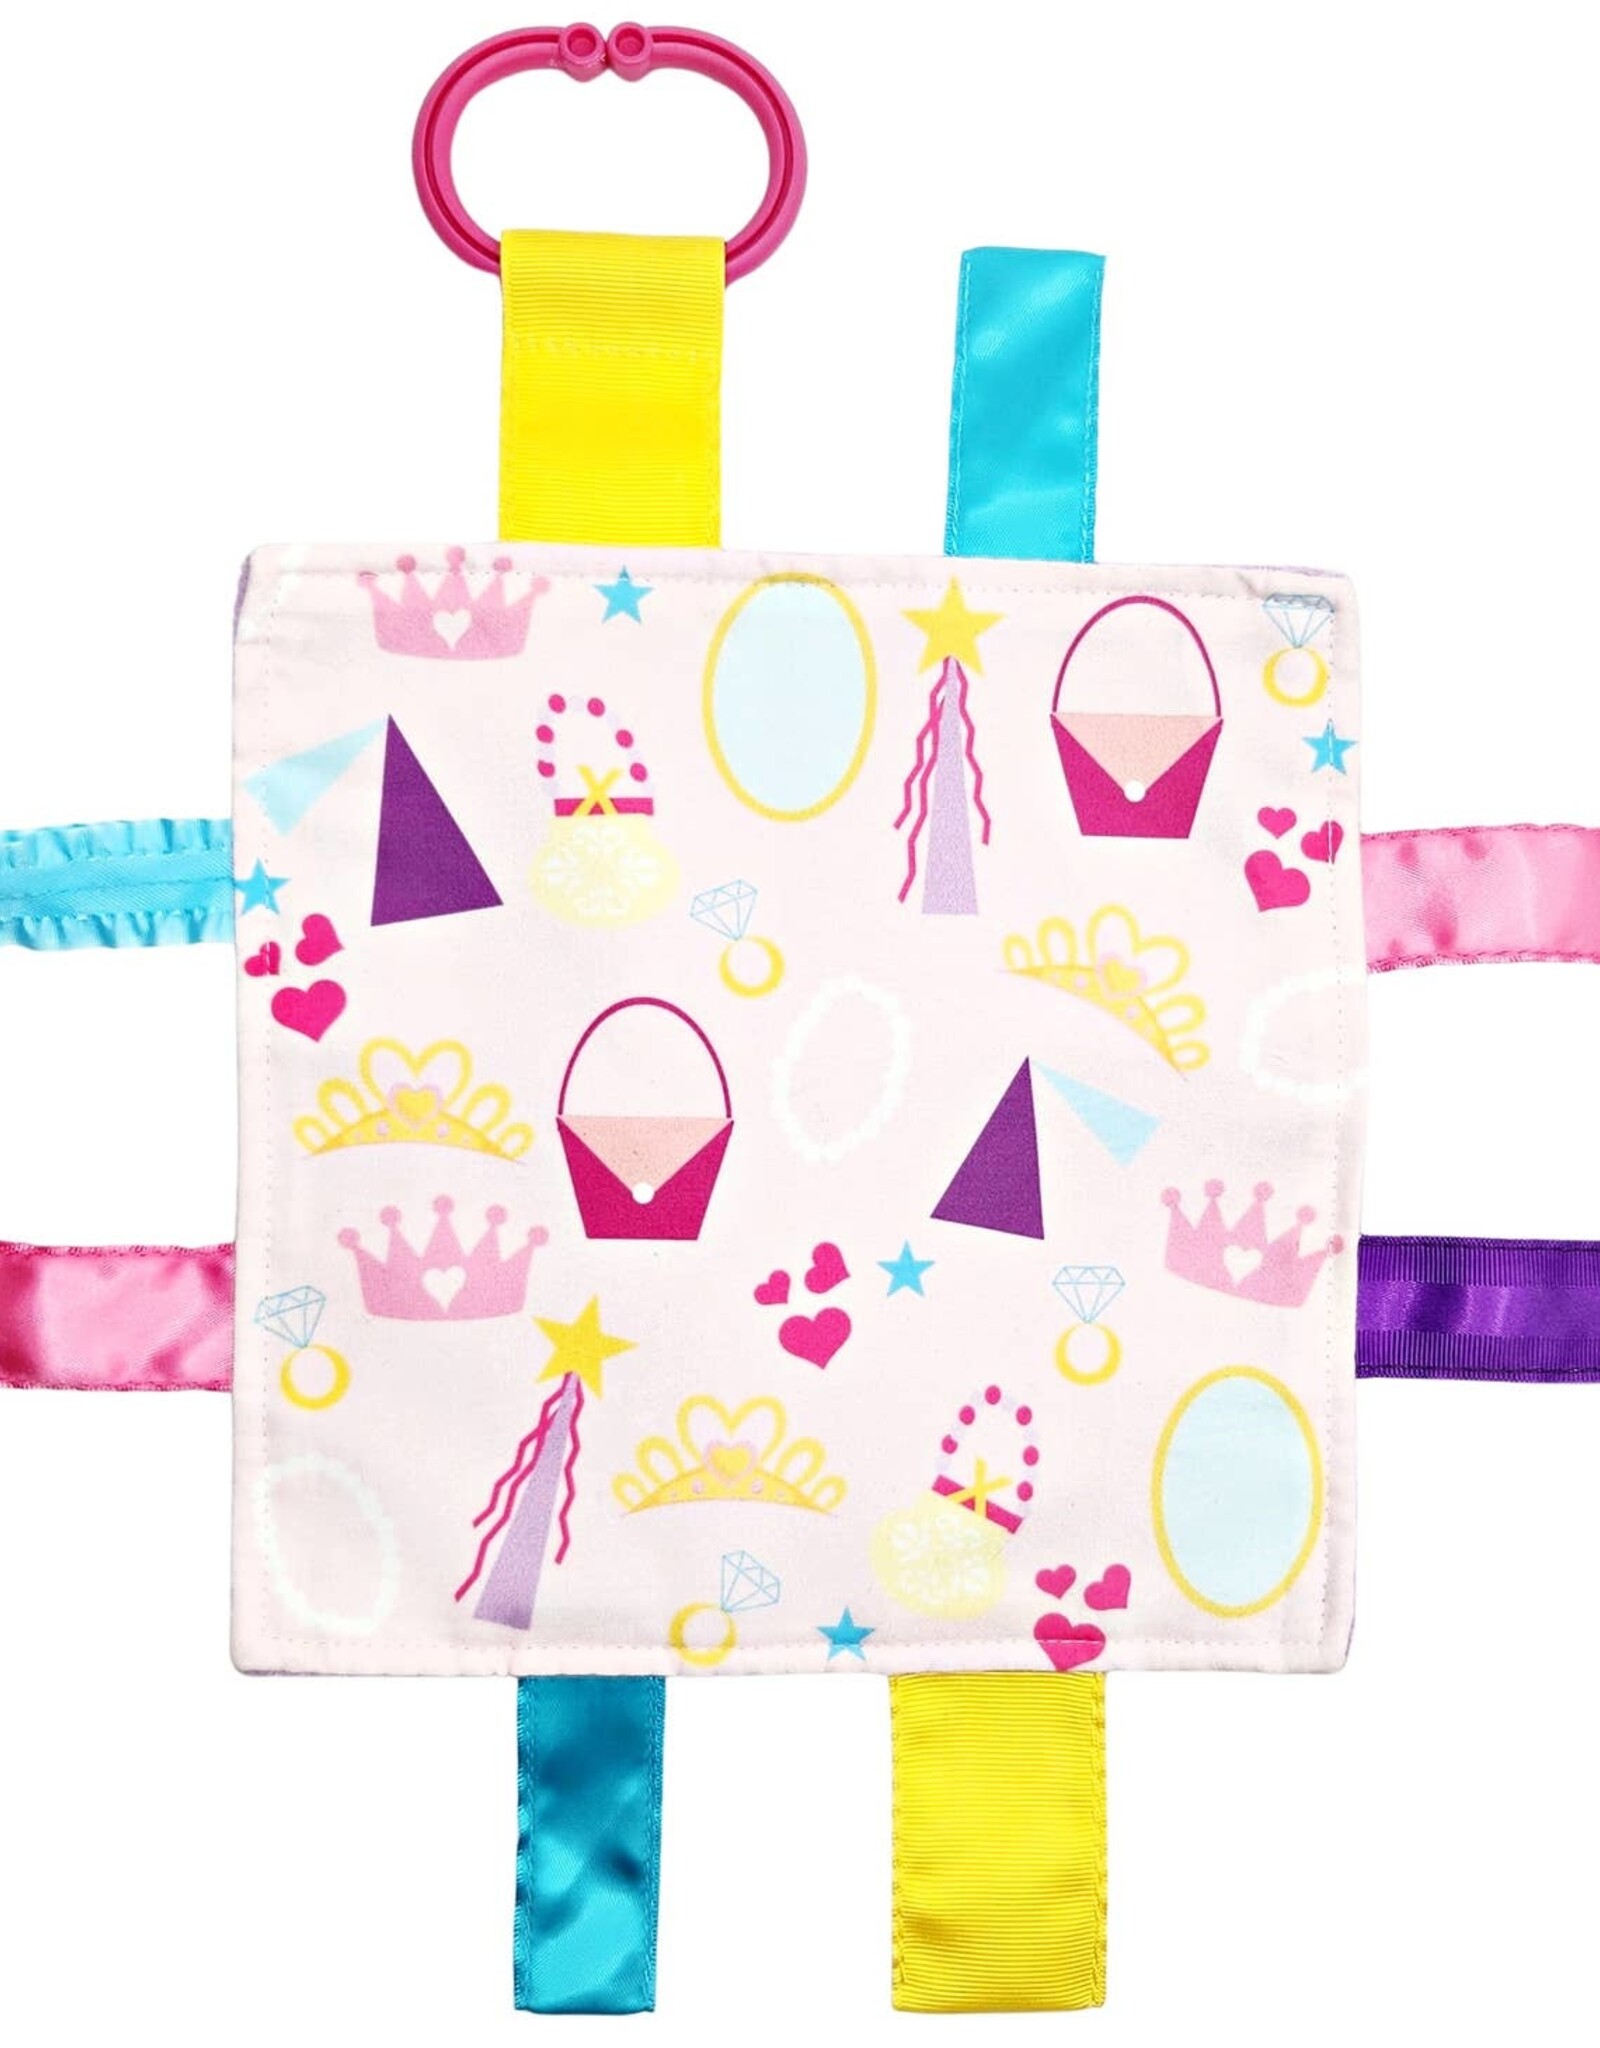 Baby Jack and Company Crinkle Tag Squares 8 x 8